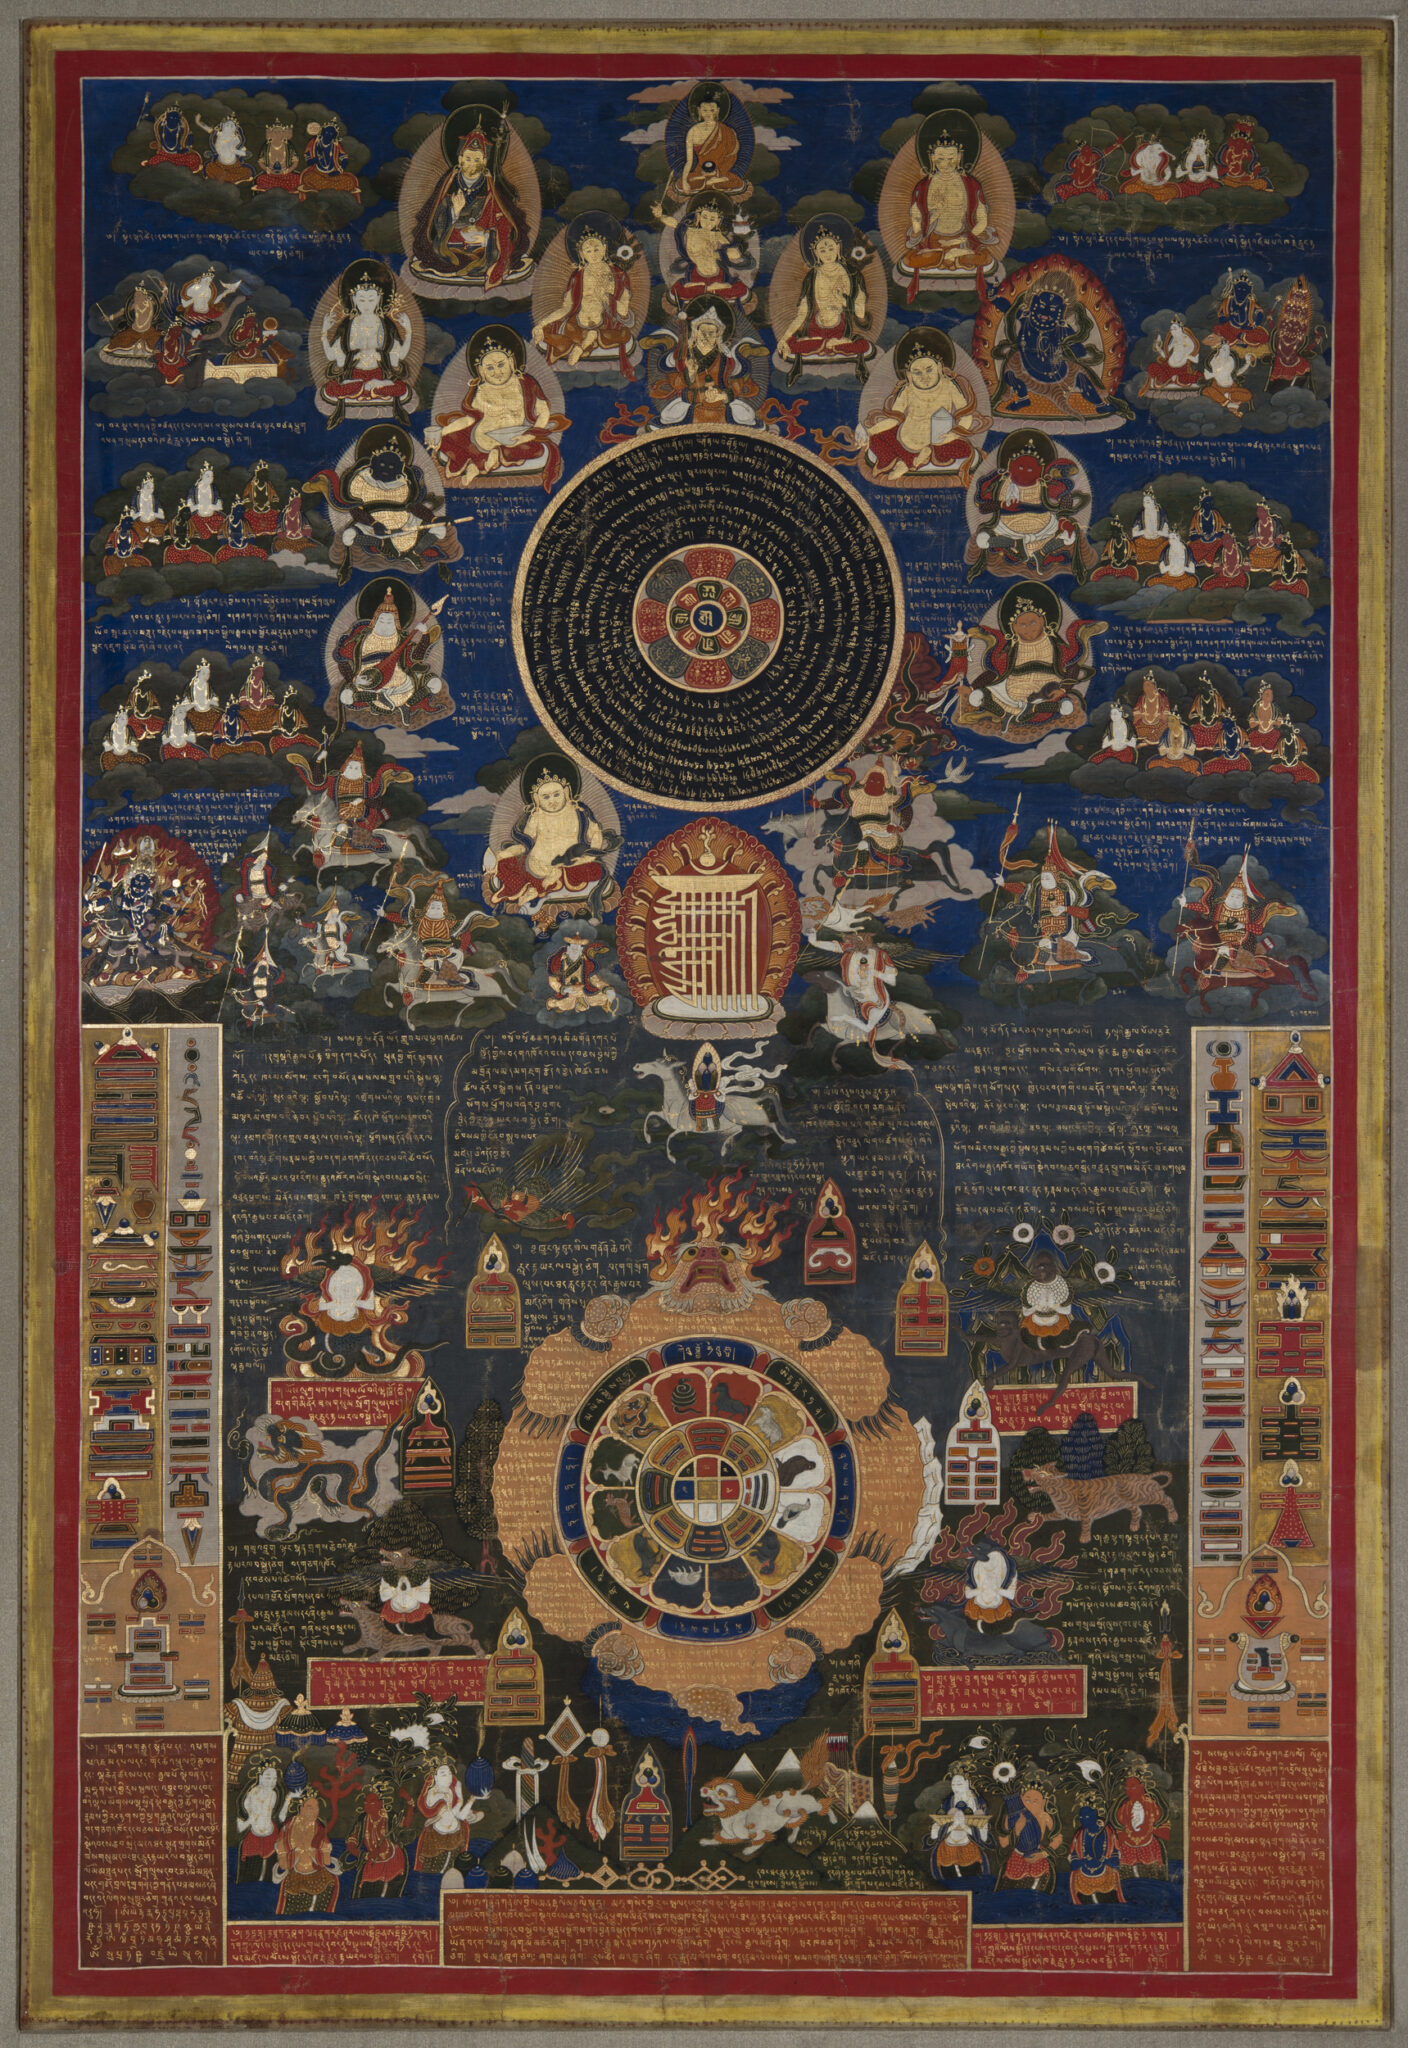 Astrological chart featuring circle surrounded by portraits in top half, circle surrounded by text and scenes in bottom half